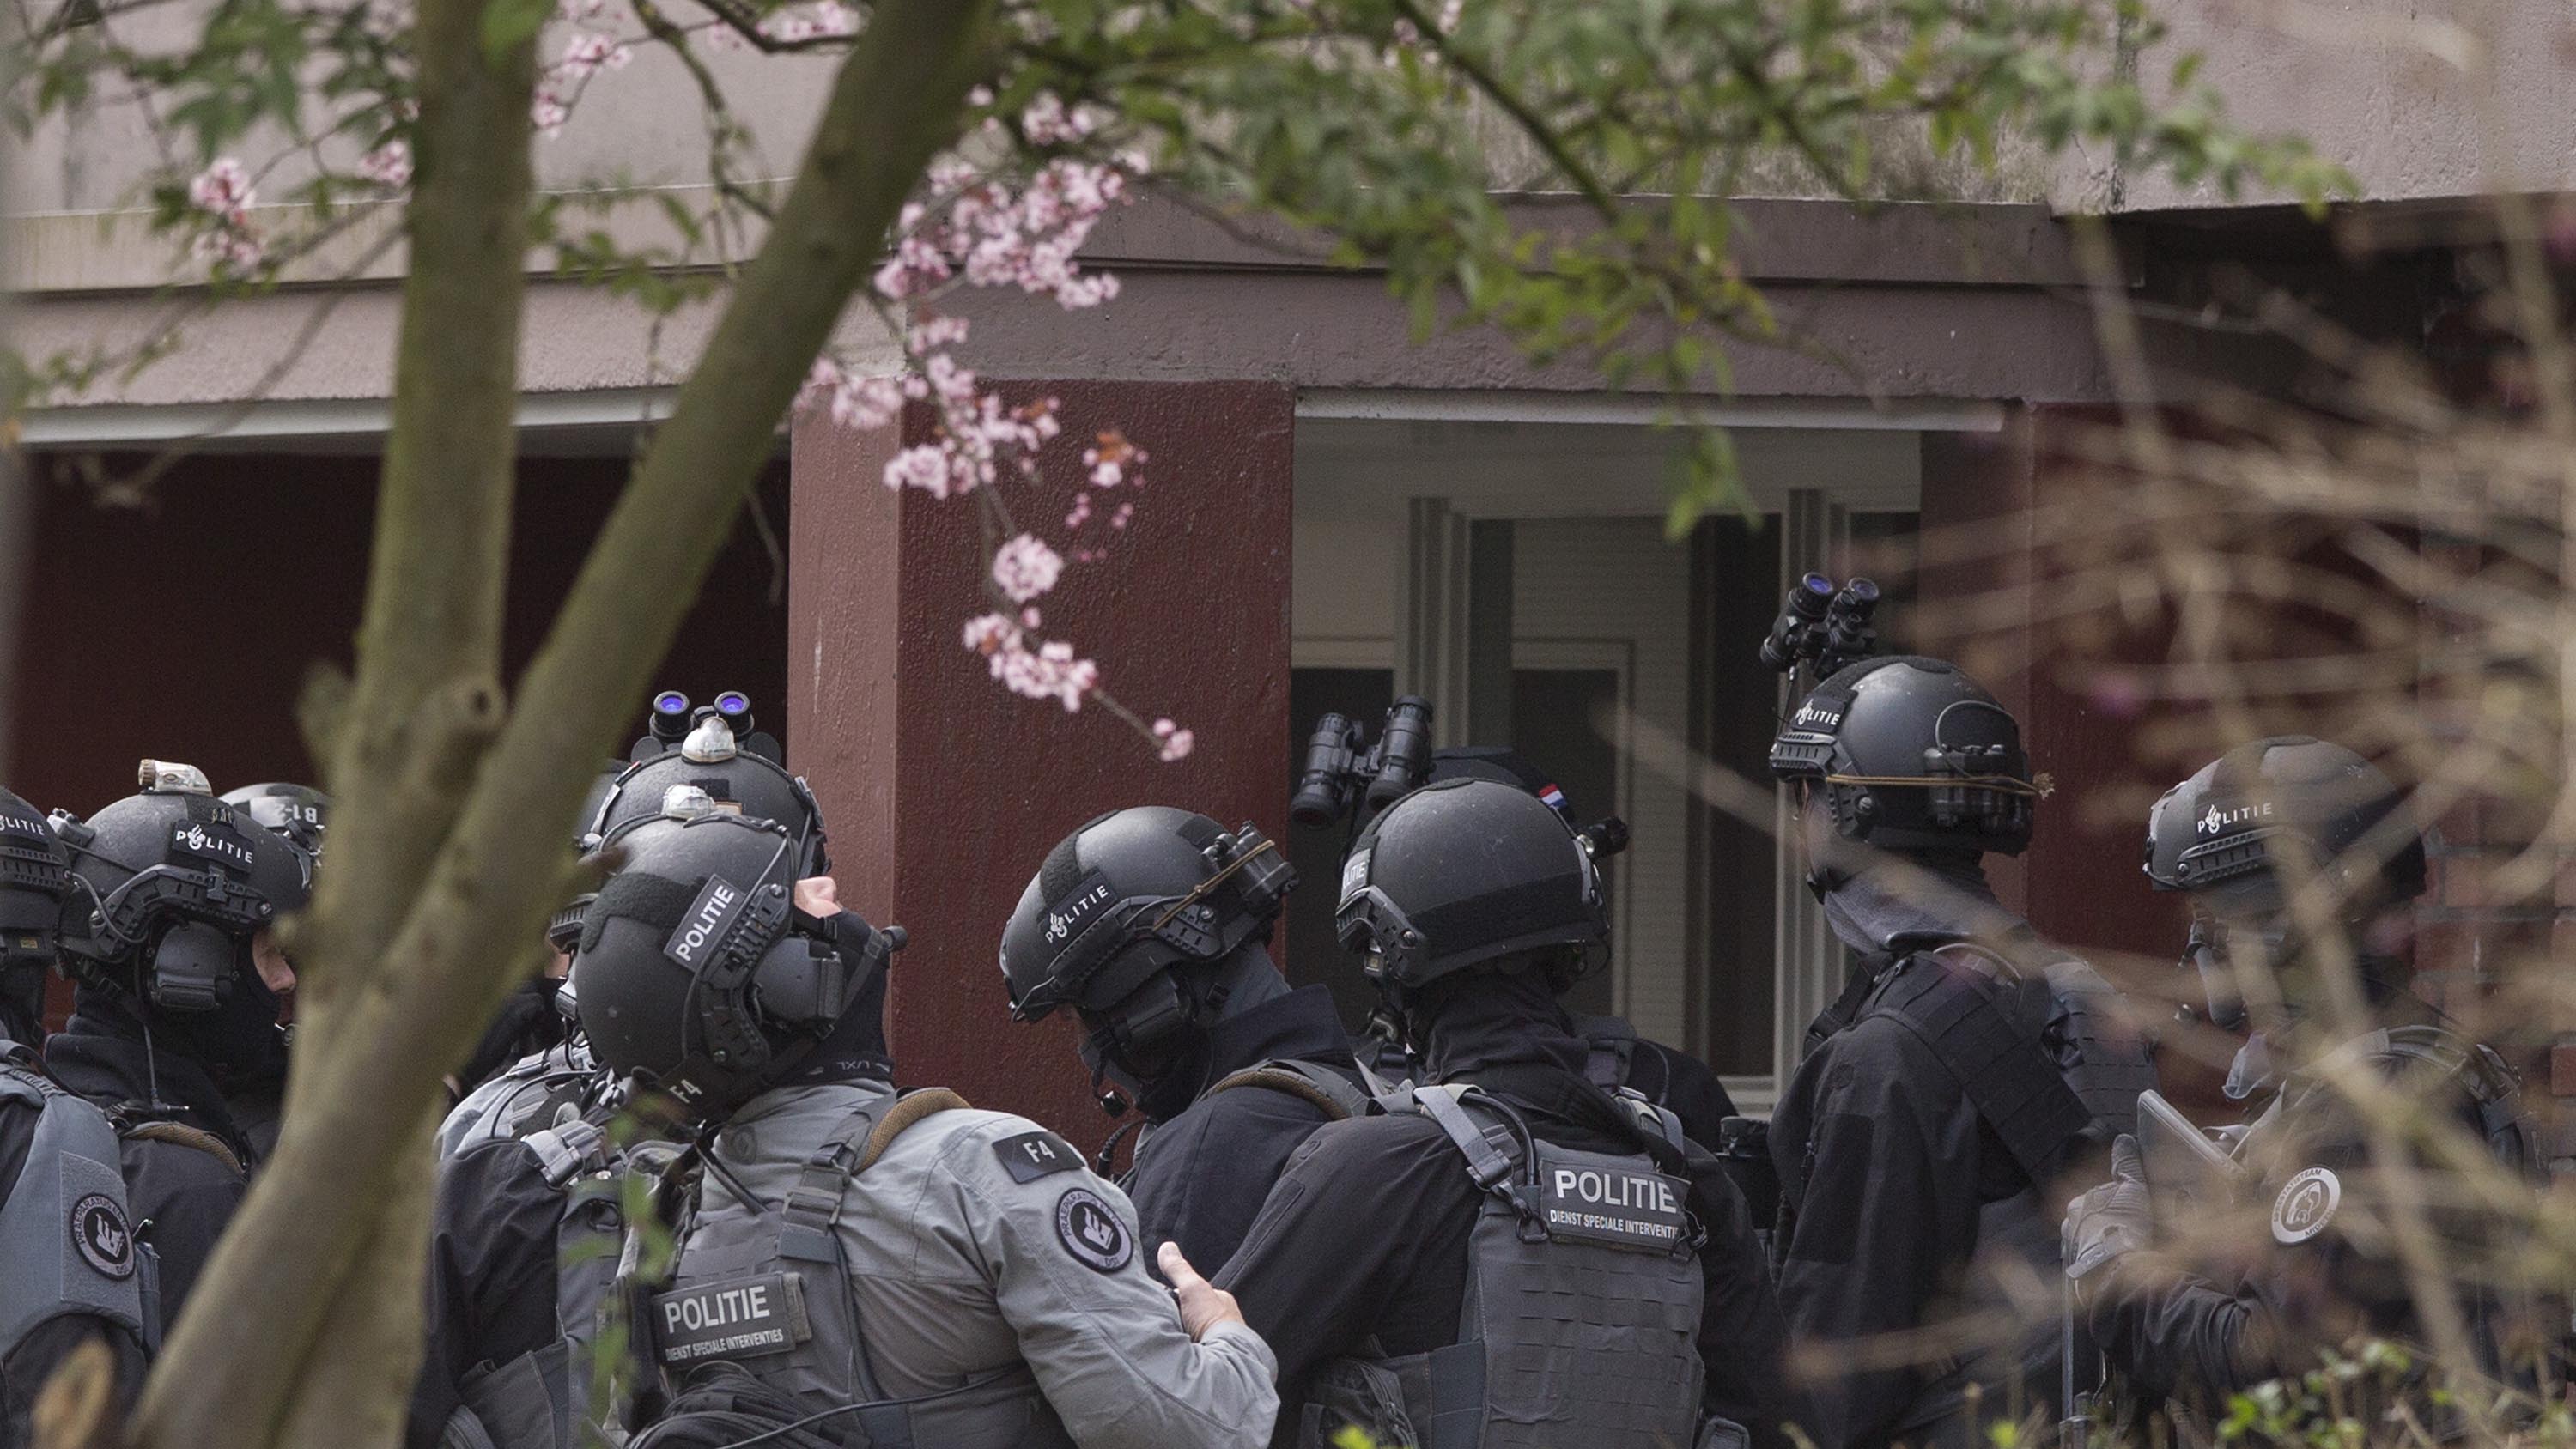 Dutch counter terrorism police prepare to enter a house after a shooting incident in Utrecht, Netherlands, Monday, March 18, 2019. Police in the central Dutch city of Utrecht say on Twitter that "multiple" people have been injured as a result of a shooting in a tram in a residential neighborhood. (AP Photo/Peter Dejong)